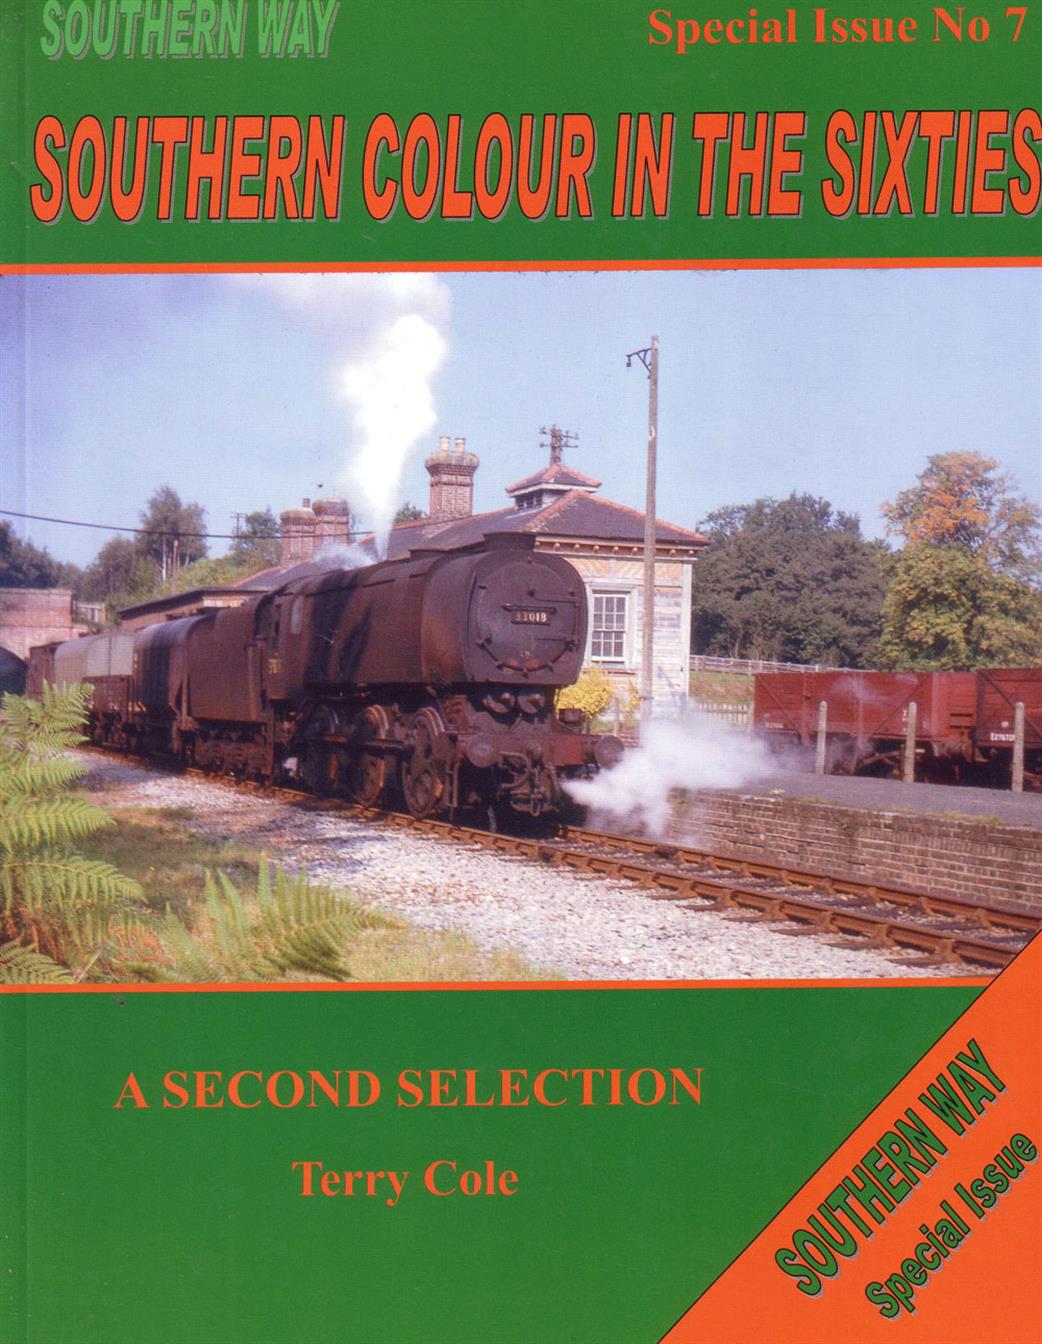 9781906419561 Southern Colour in the Sixties Book by Terry Cole